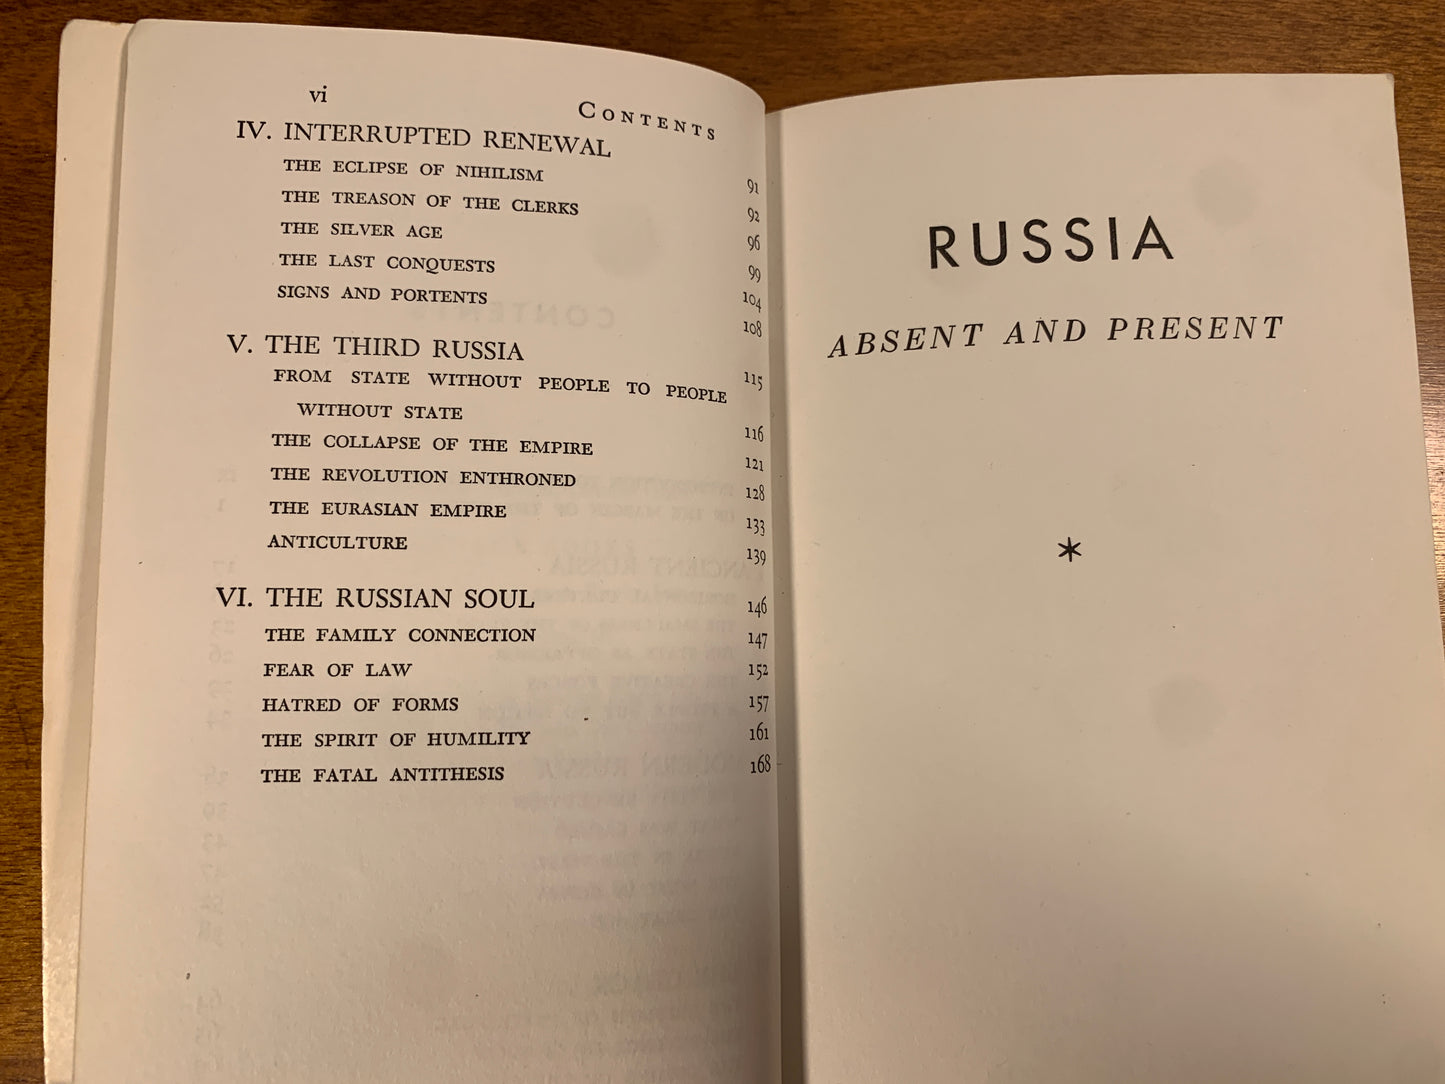 Russia: Absent and Present by Vladimir Weidle [1961]